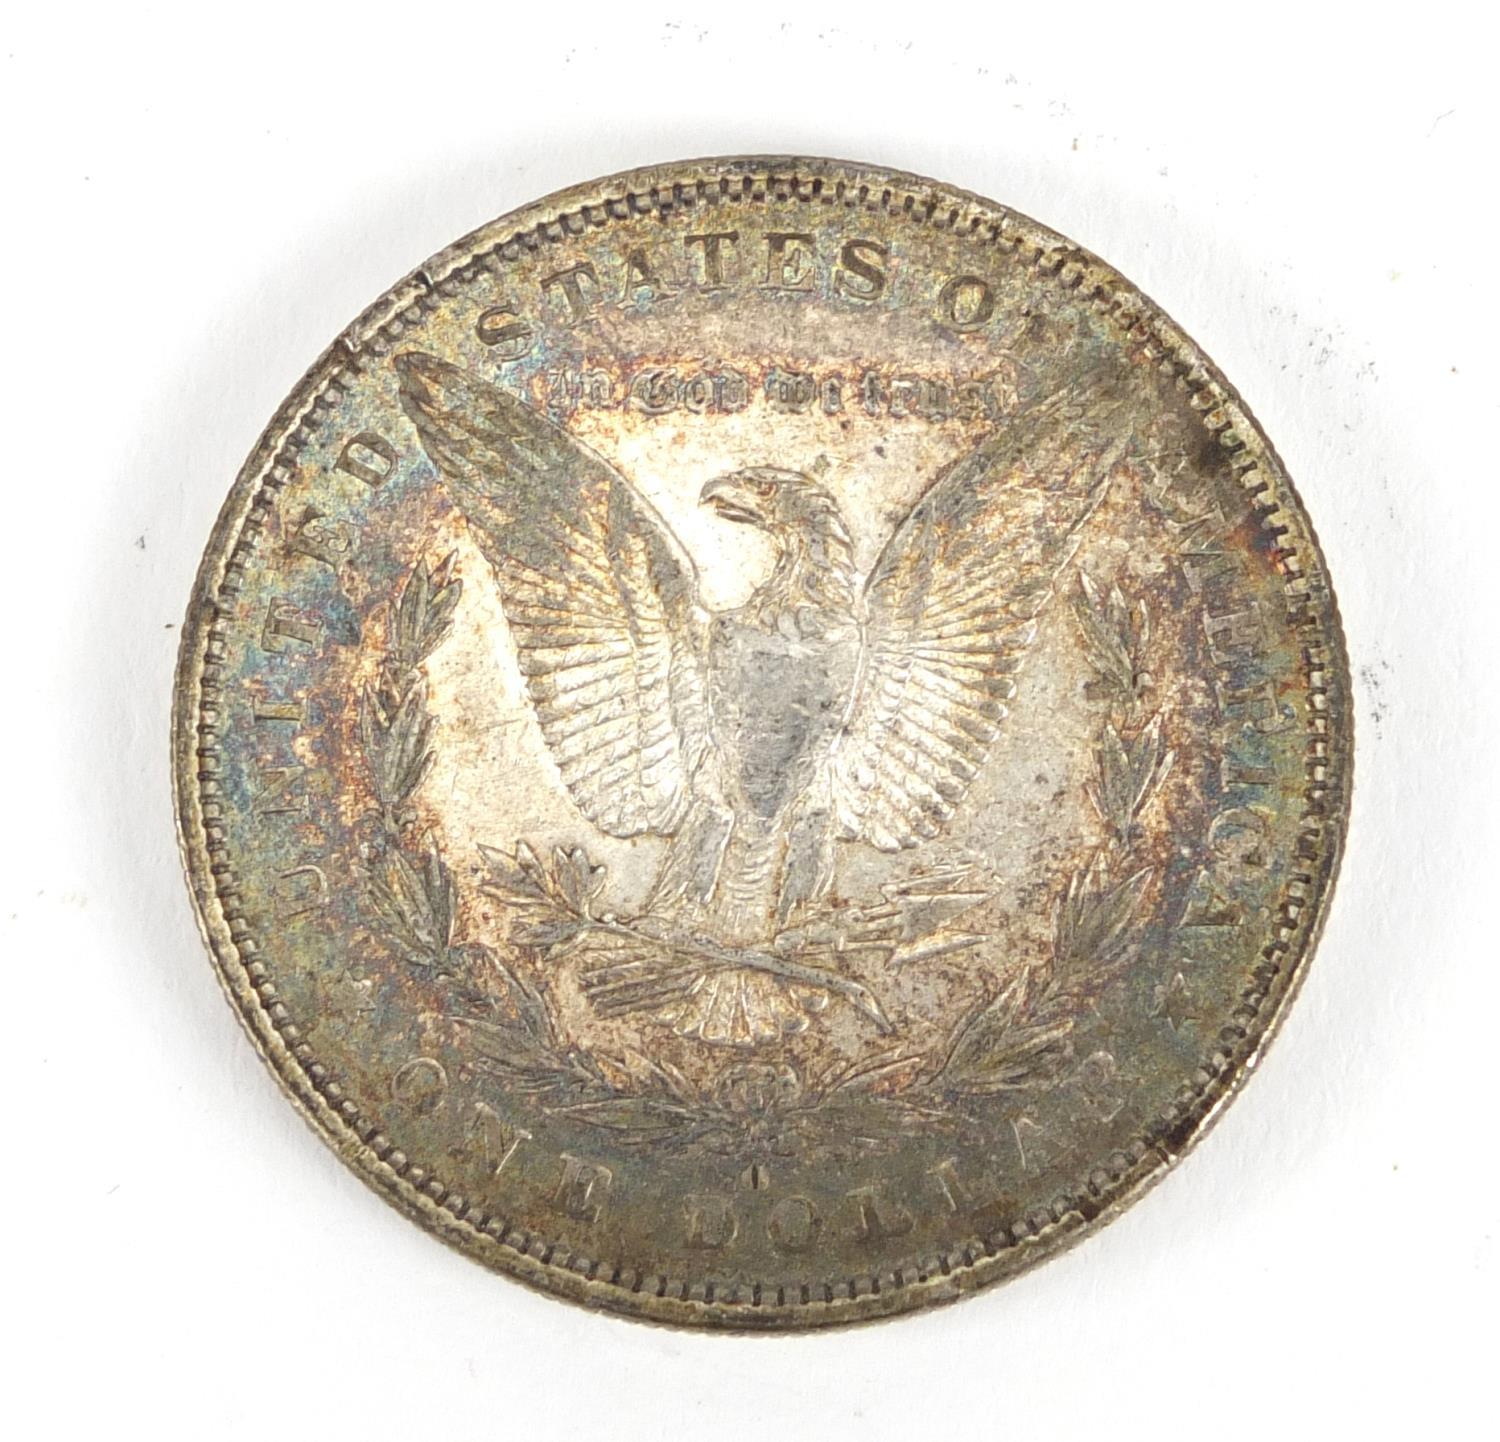 United States of America 1879 one dollar : For Further Condition Reports Please Visit Our Website - Image 2 of 2